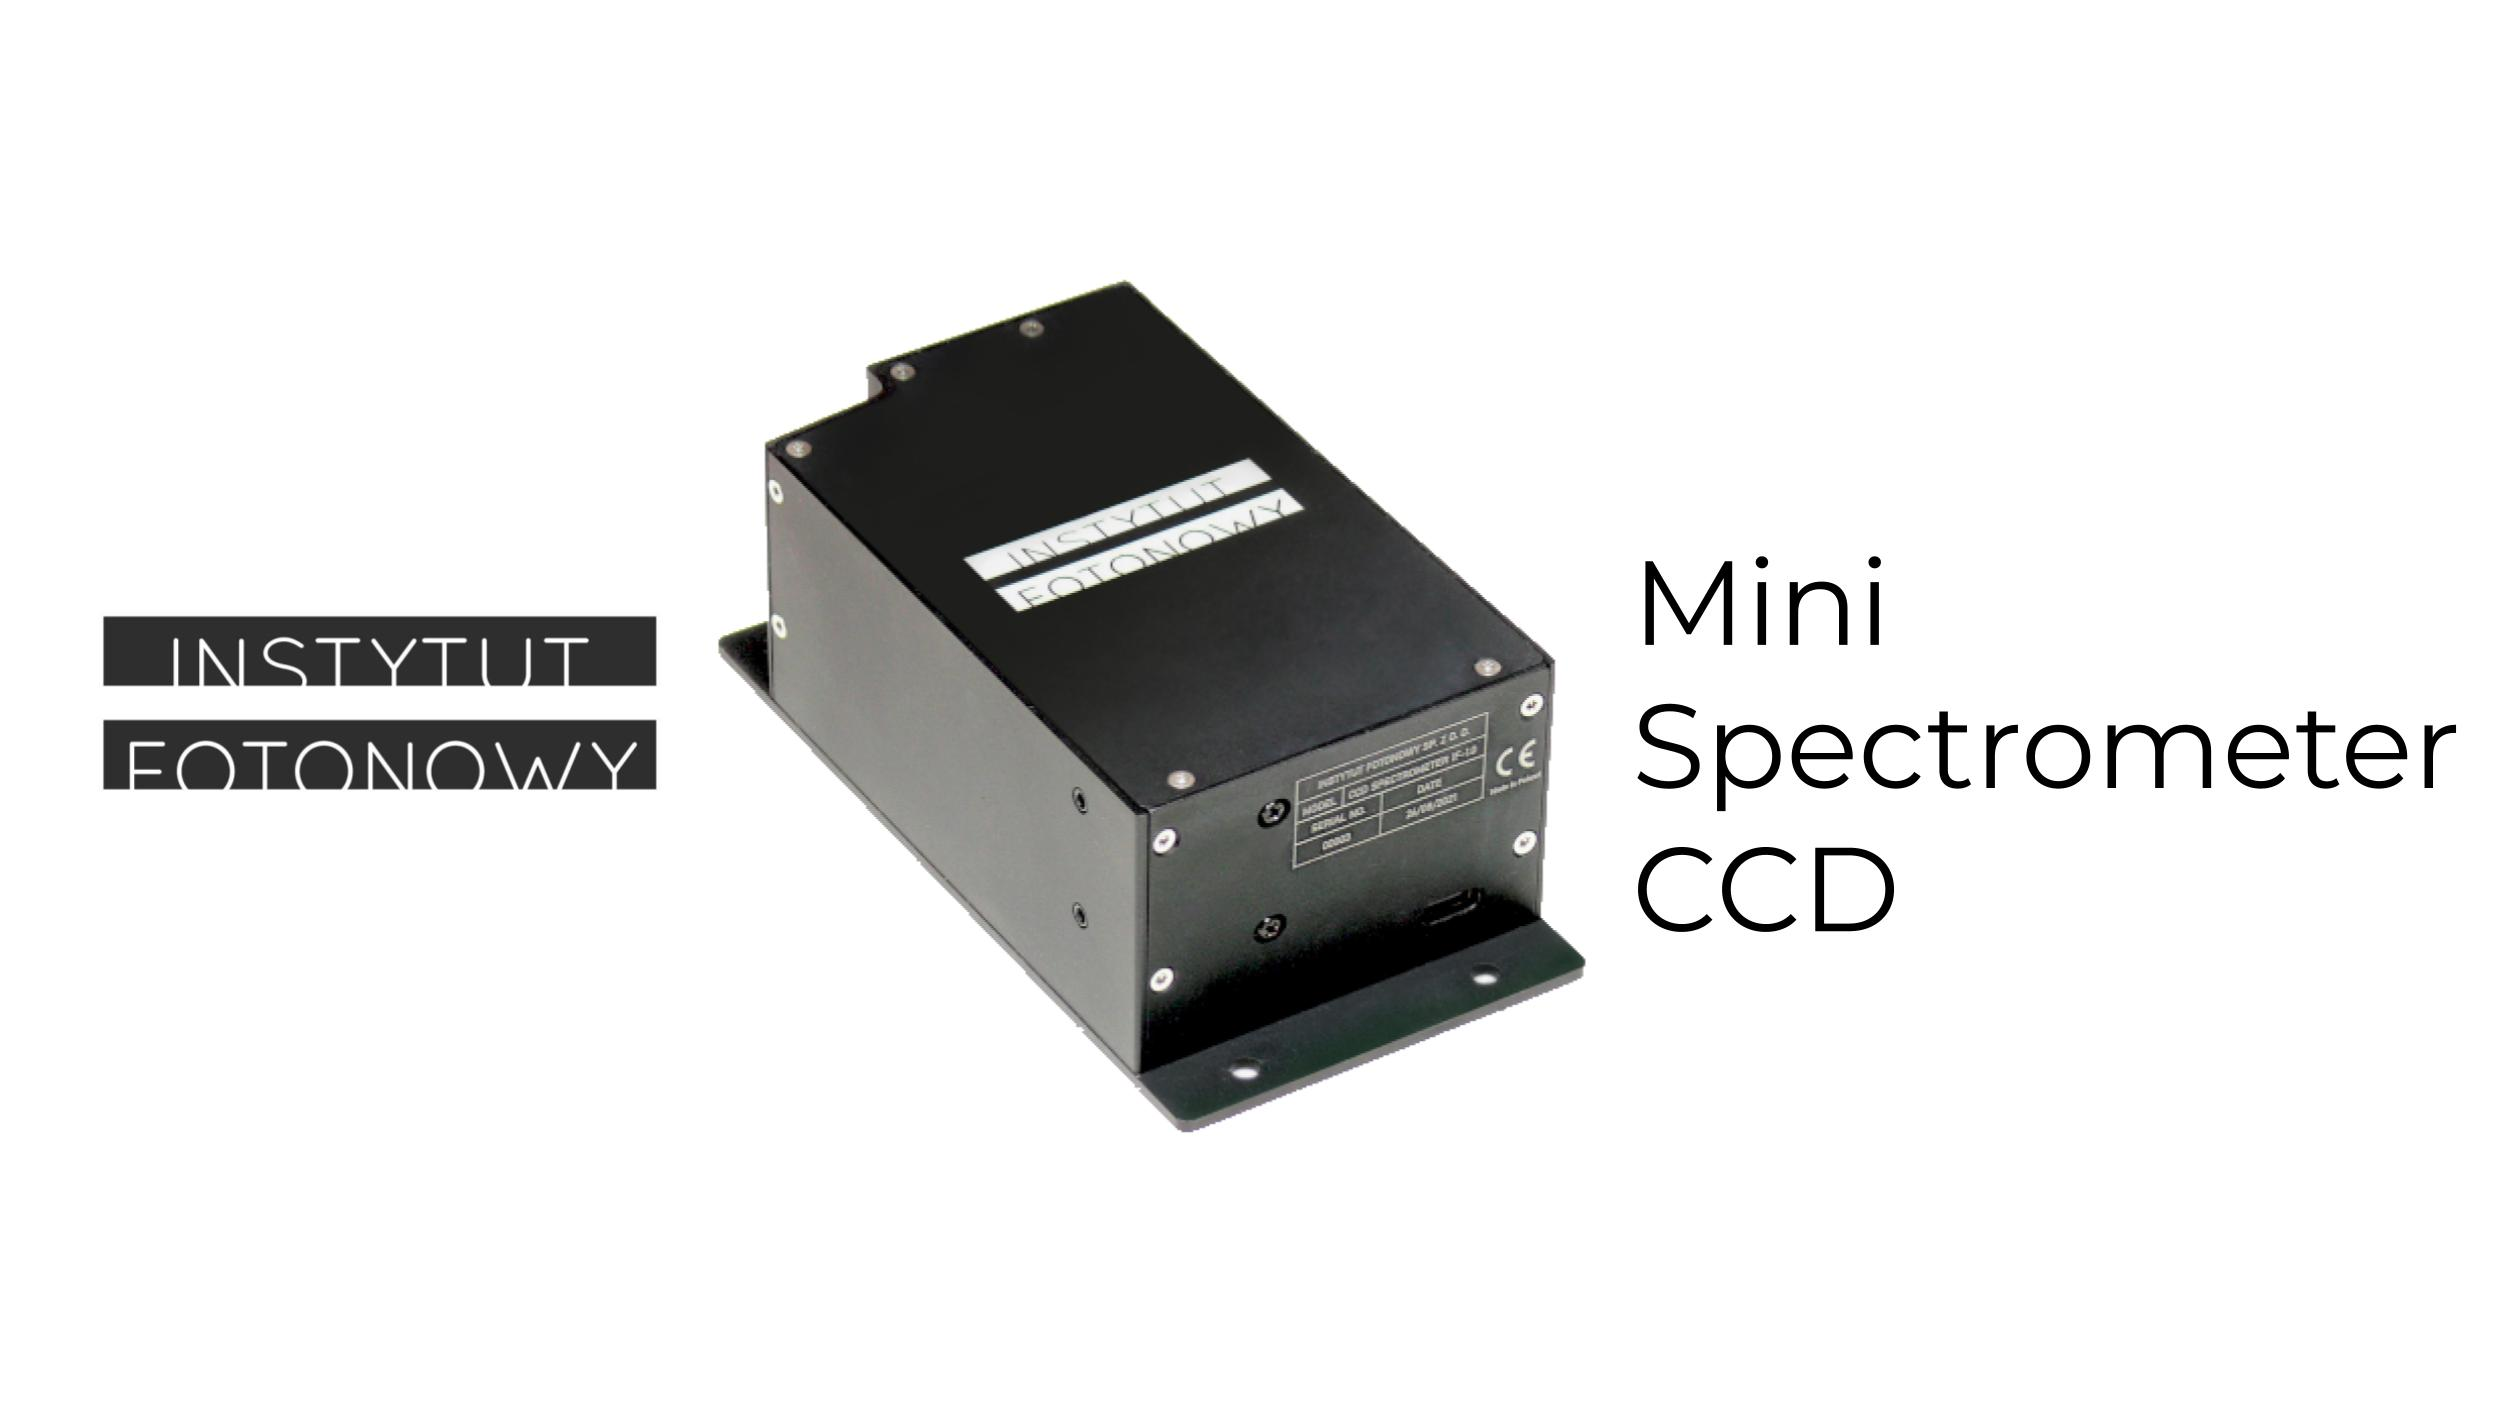 Mini Spectrometer CCD - universal, portable, compact appliance for visible light measurements